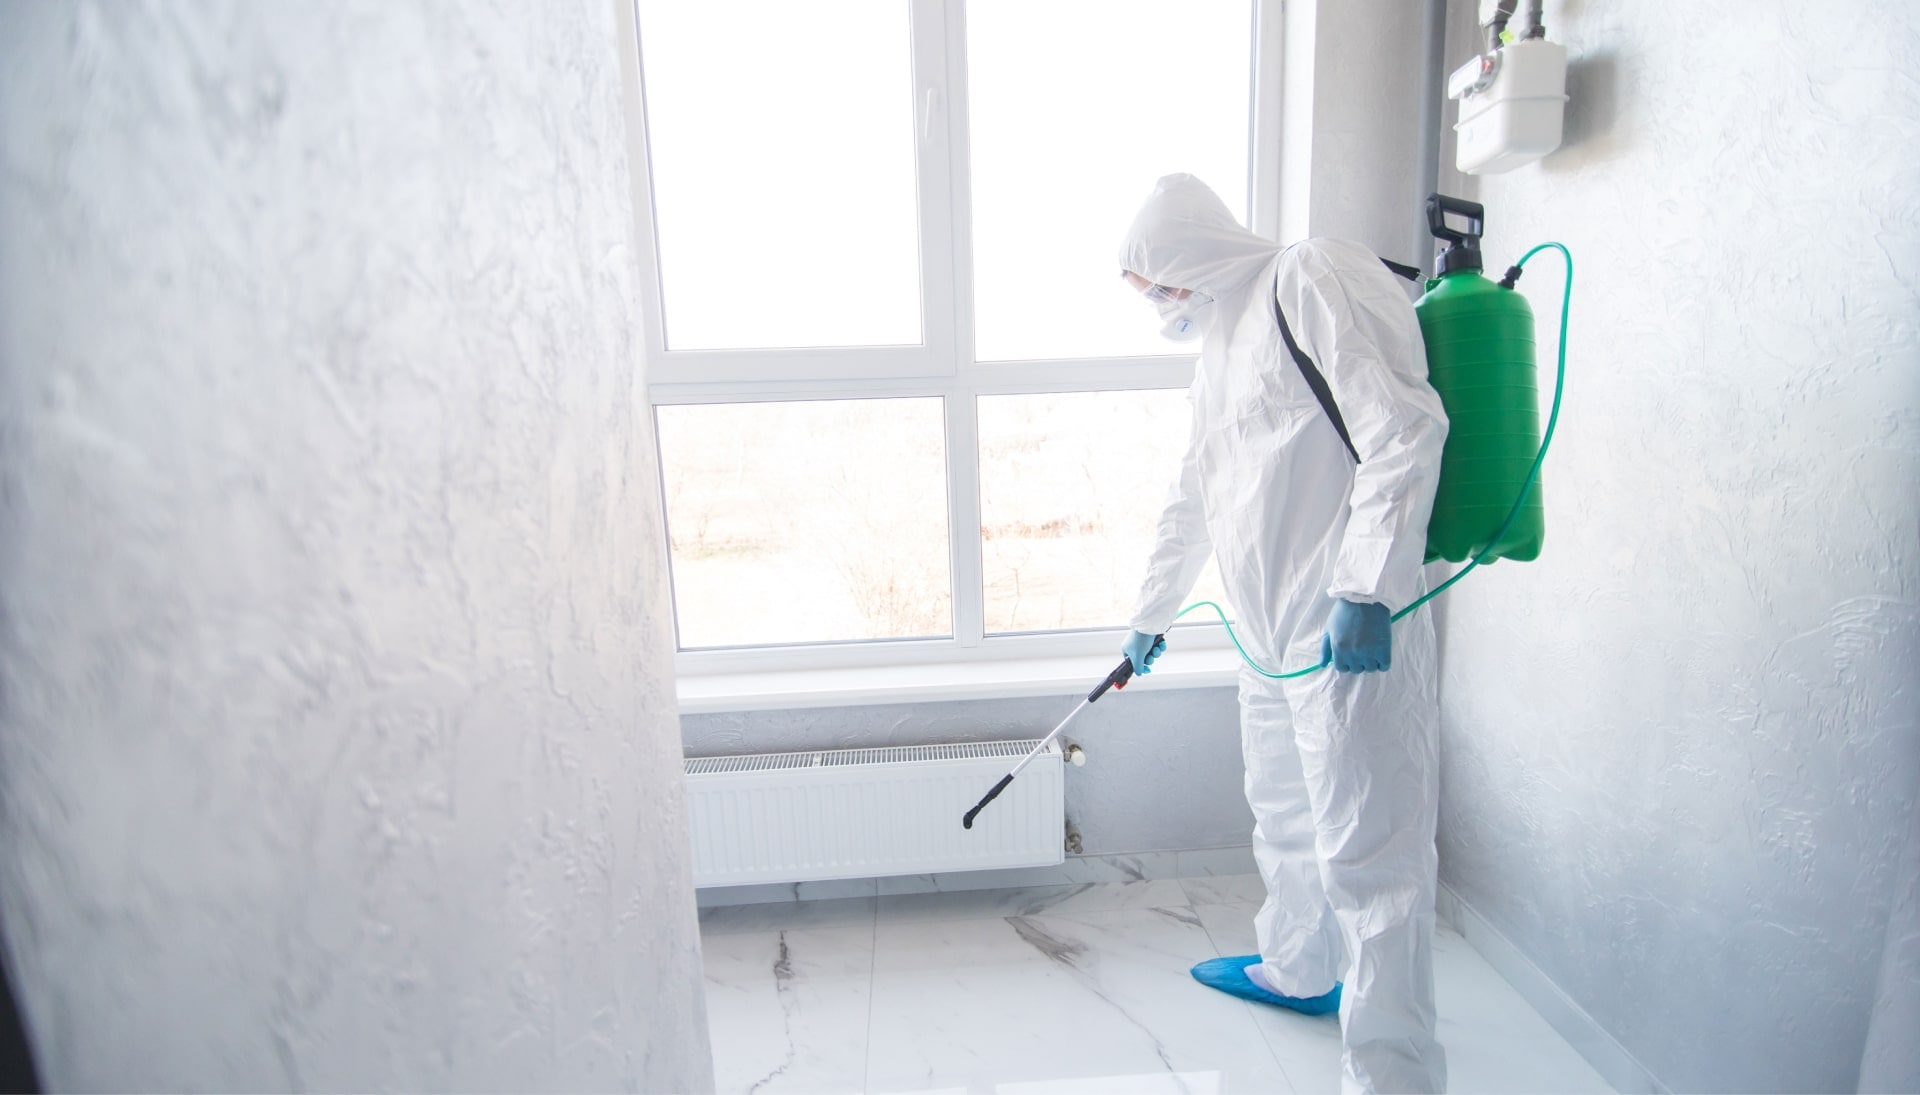 We provide the highest-quality mold inspection, testing, and removal services in the West Palm Beach, Florida area.